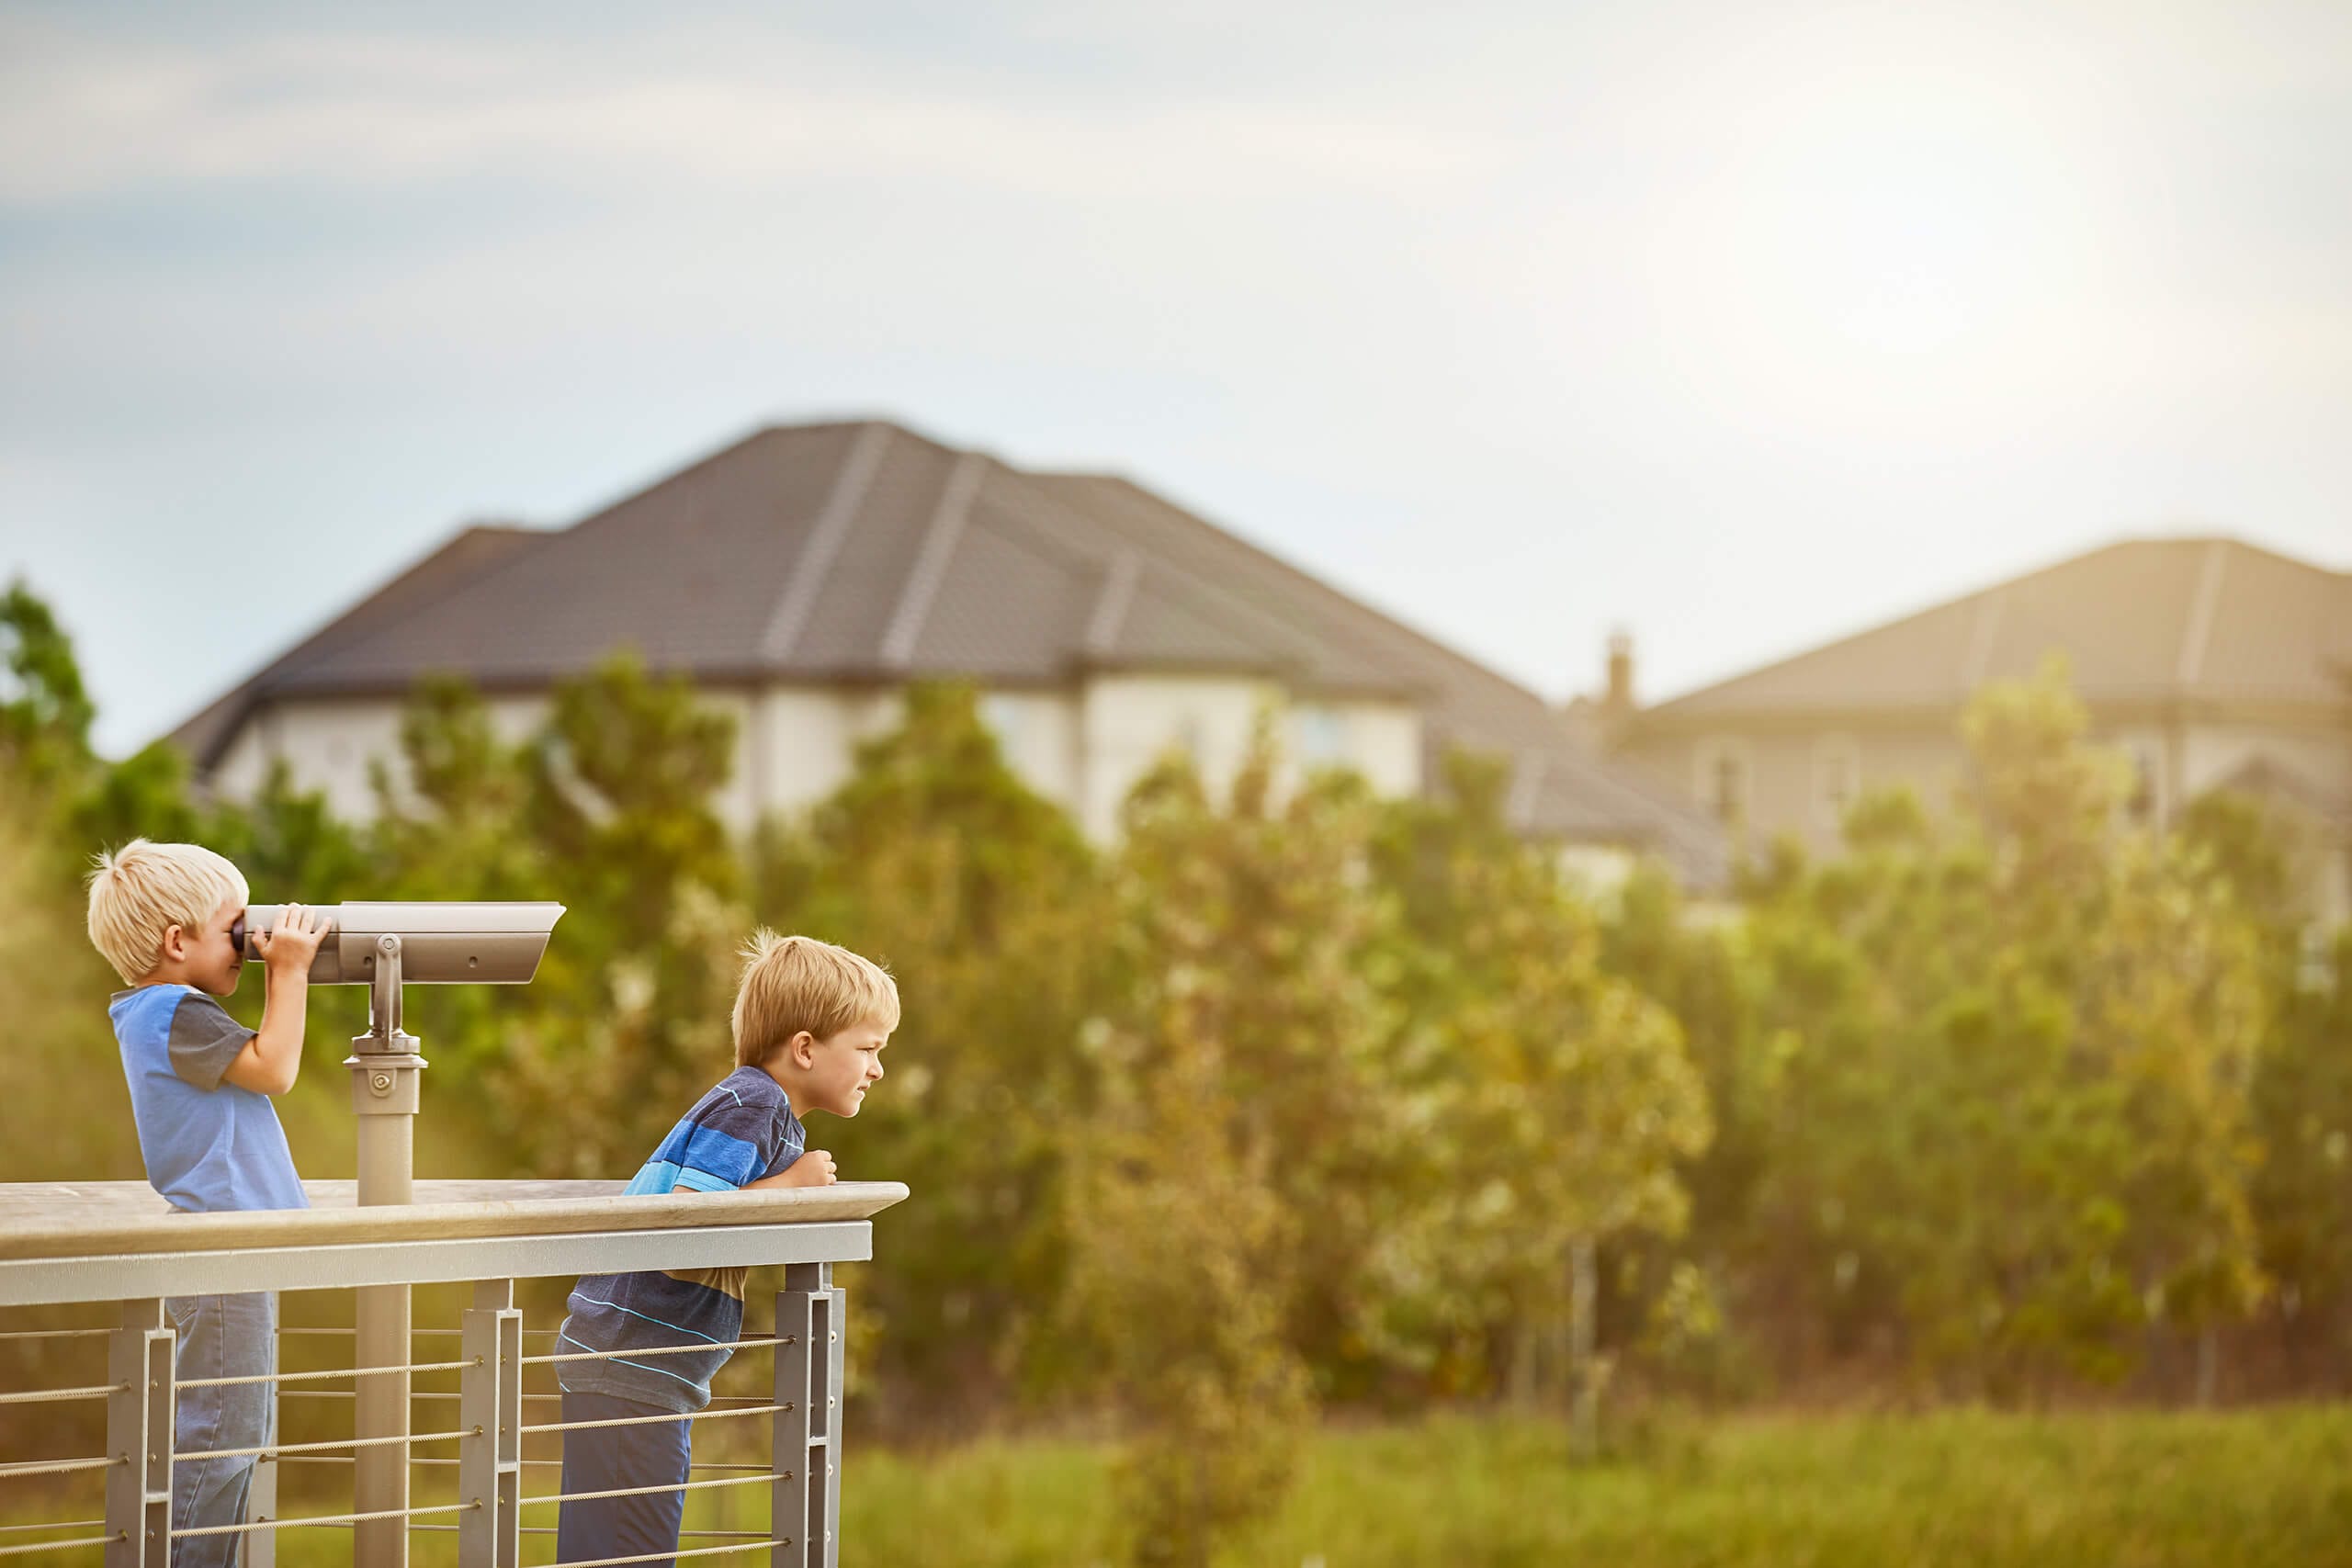 Two young friends enjoy community binoculars to enjoy viewing nature from a scenic overlook in Bridgeland.